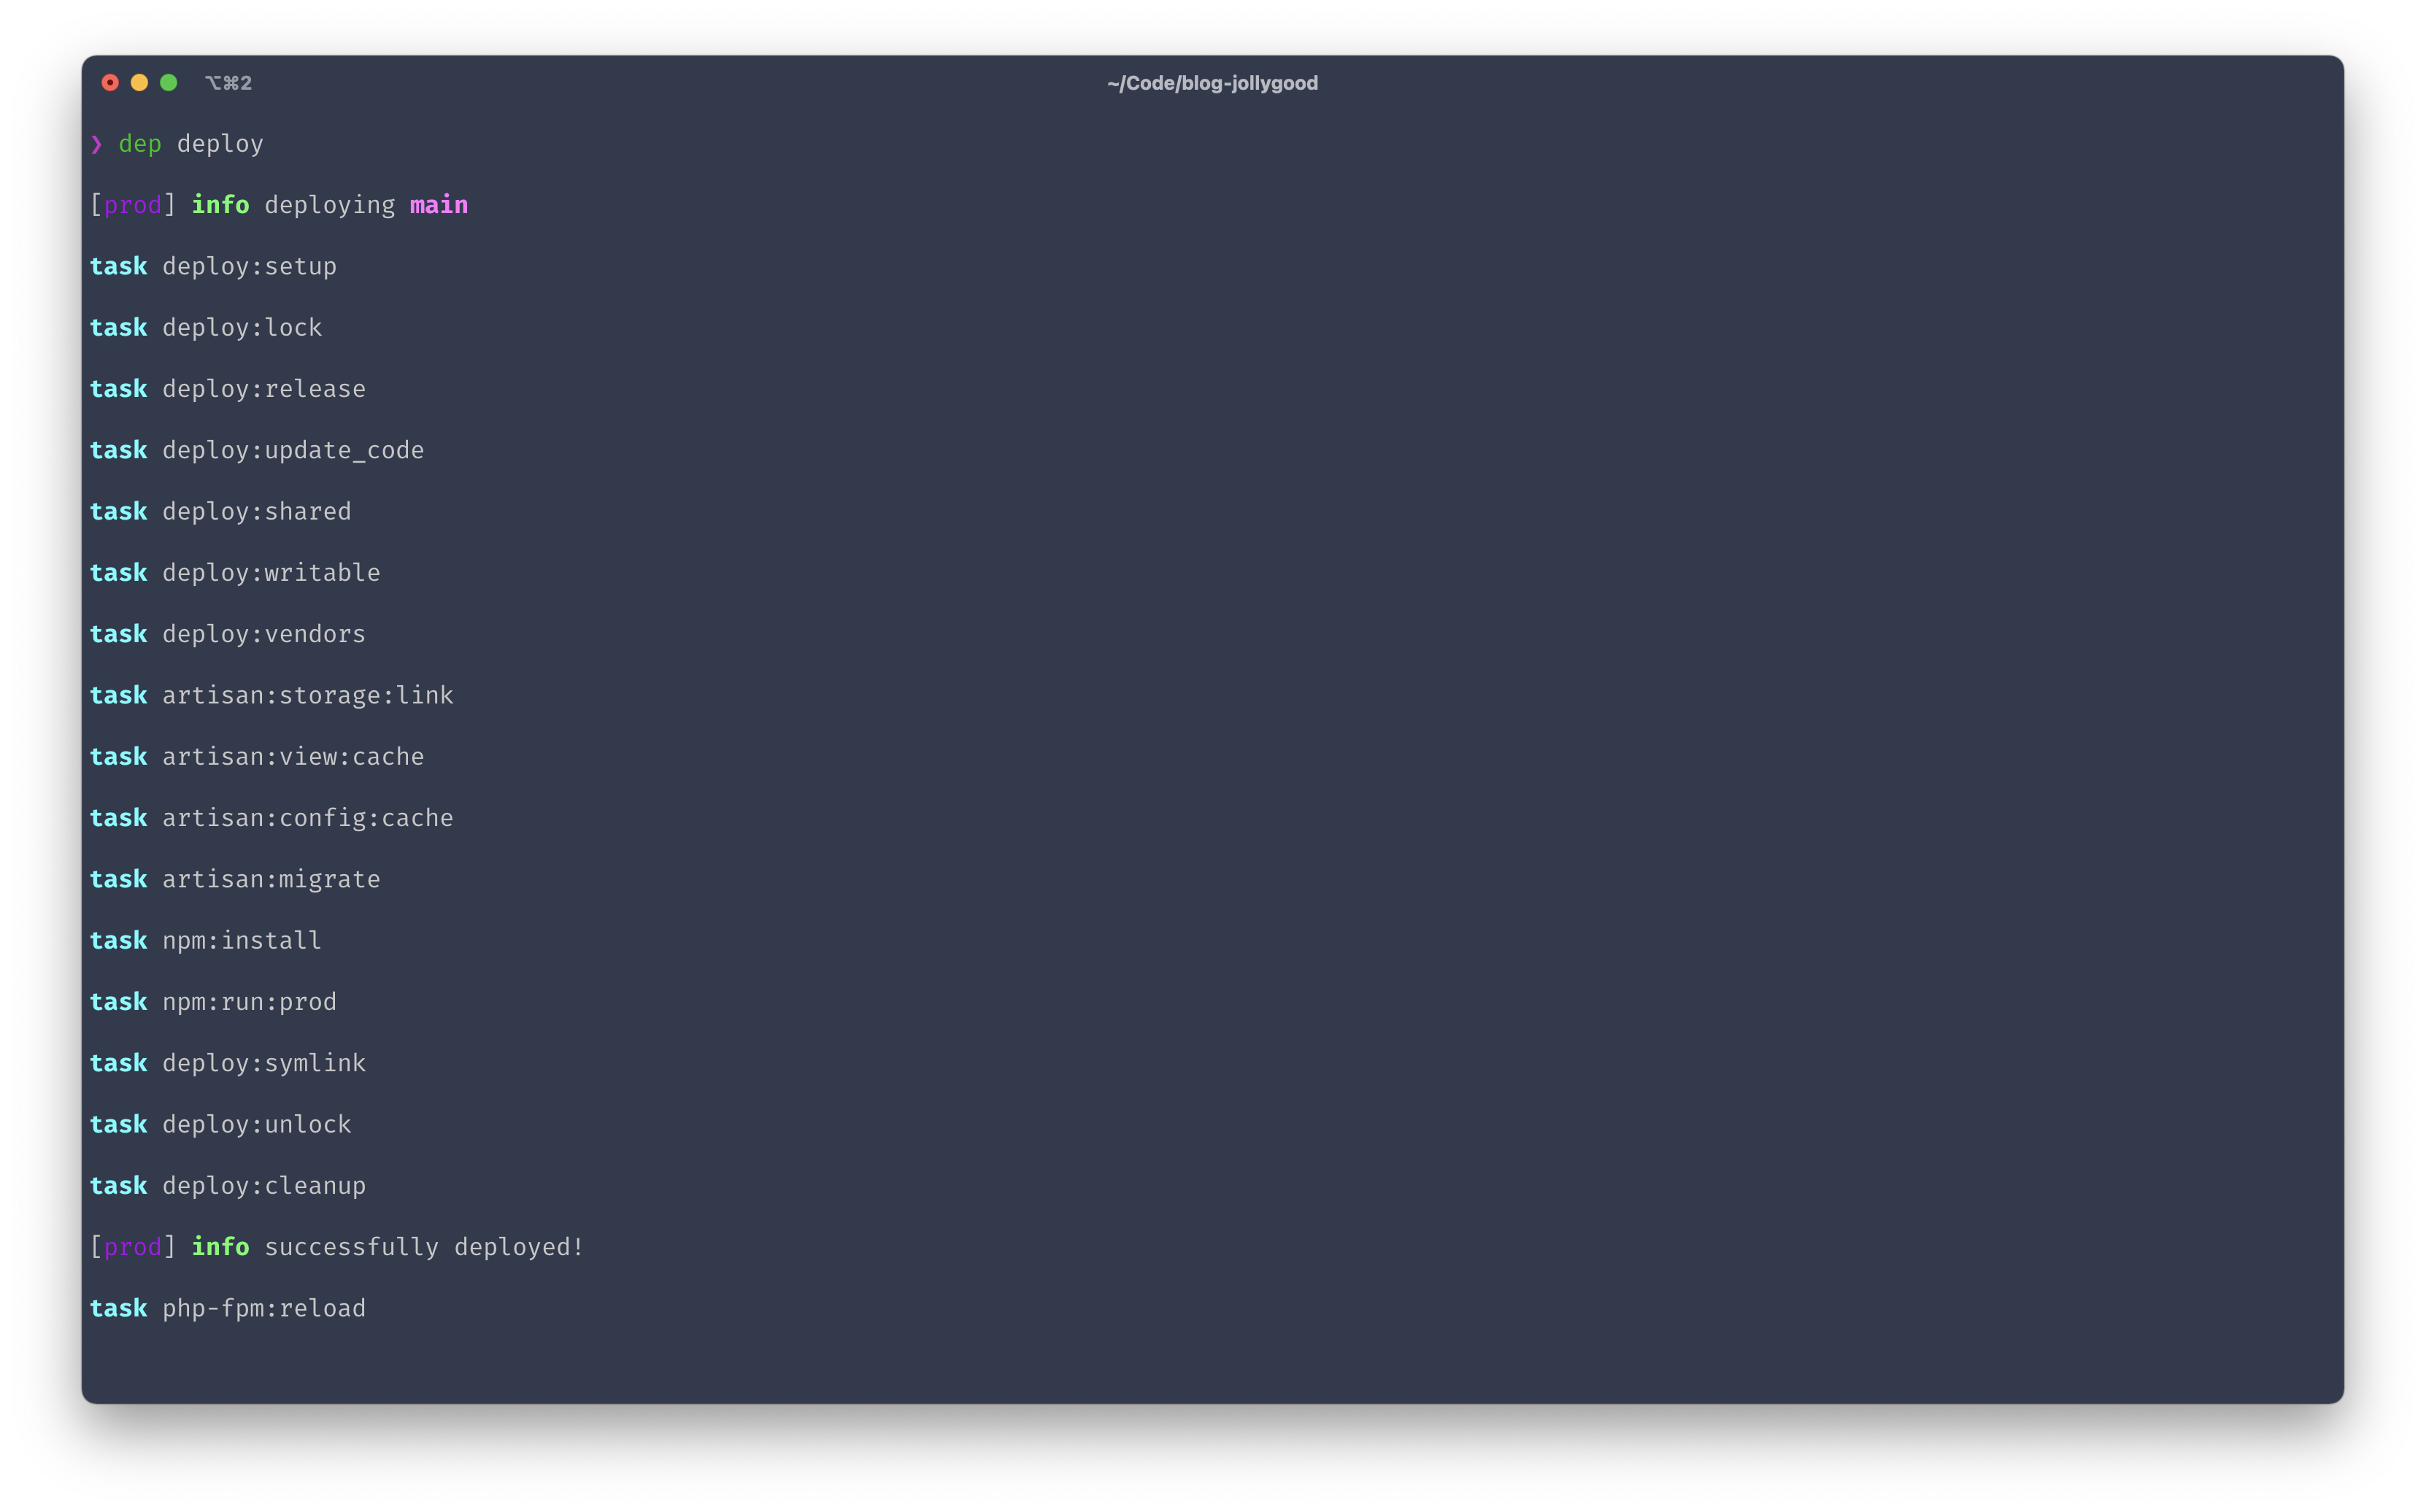 Screenshot of the terminal output for a successful “dep deploy”.